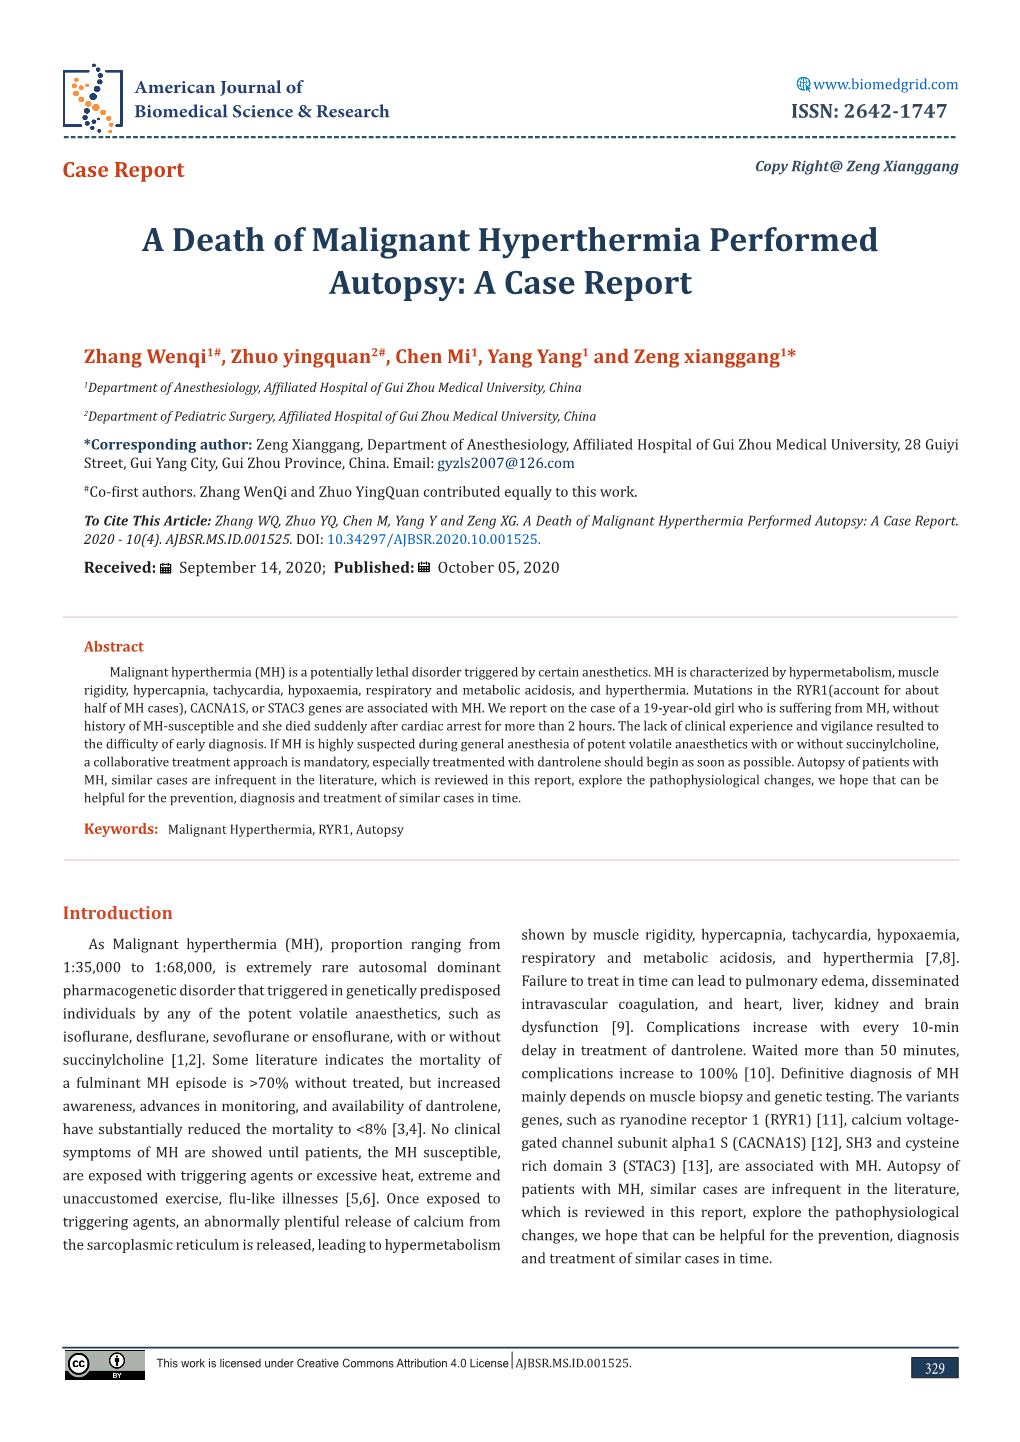 A Death of Malignant Hyperthermia Performed Autopsy: a Case Report